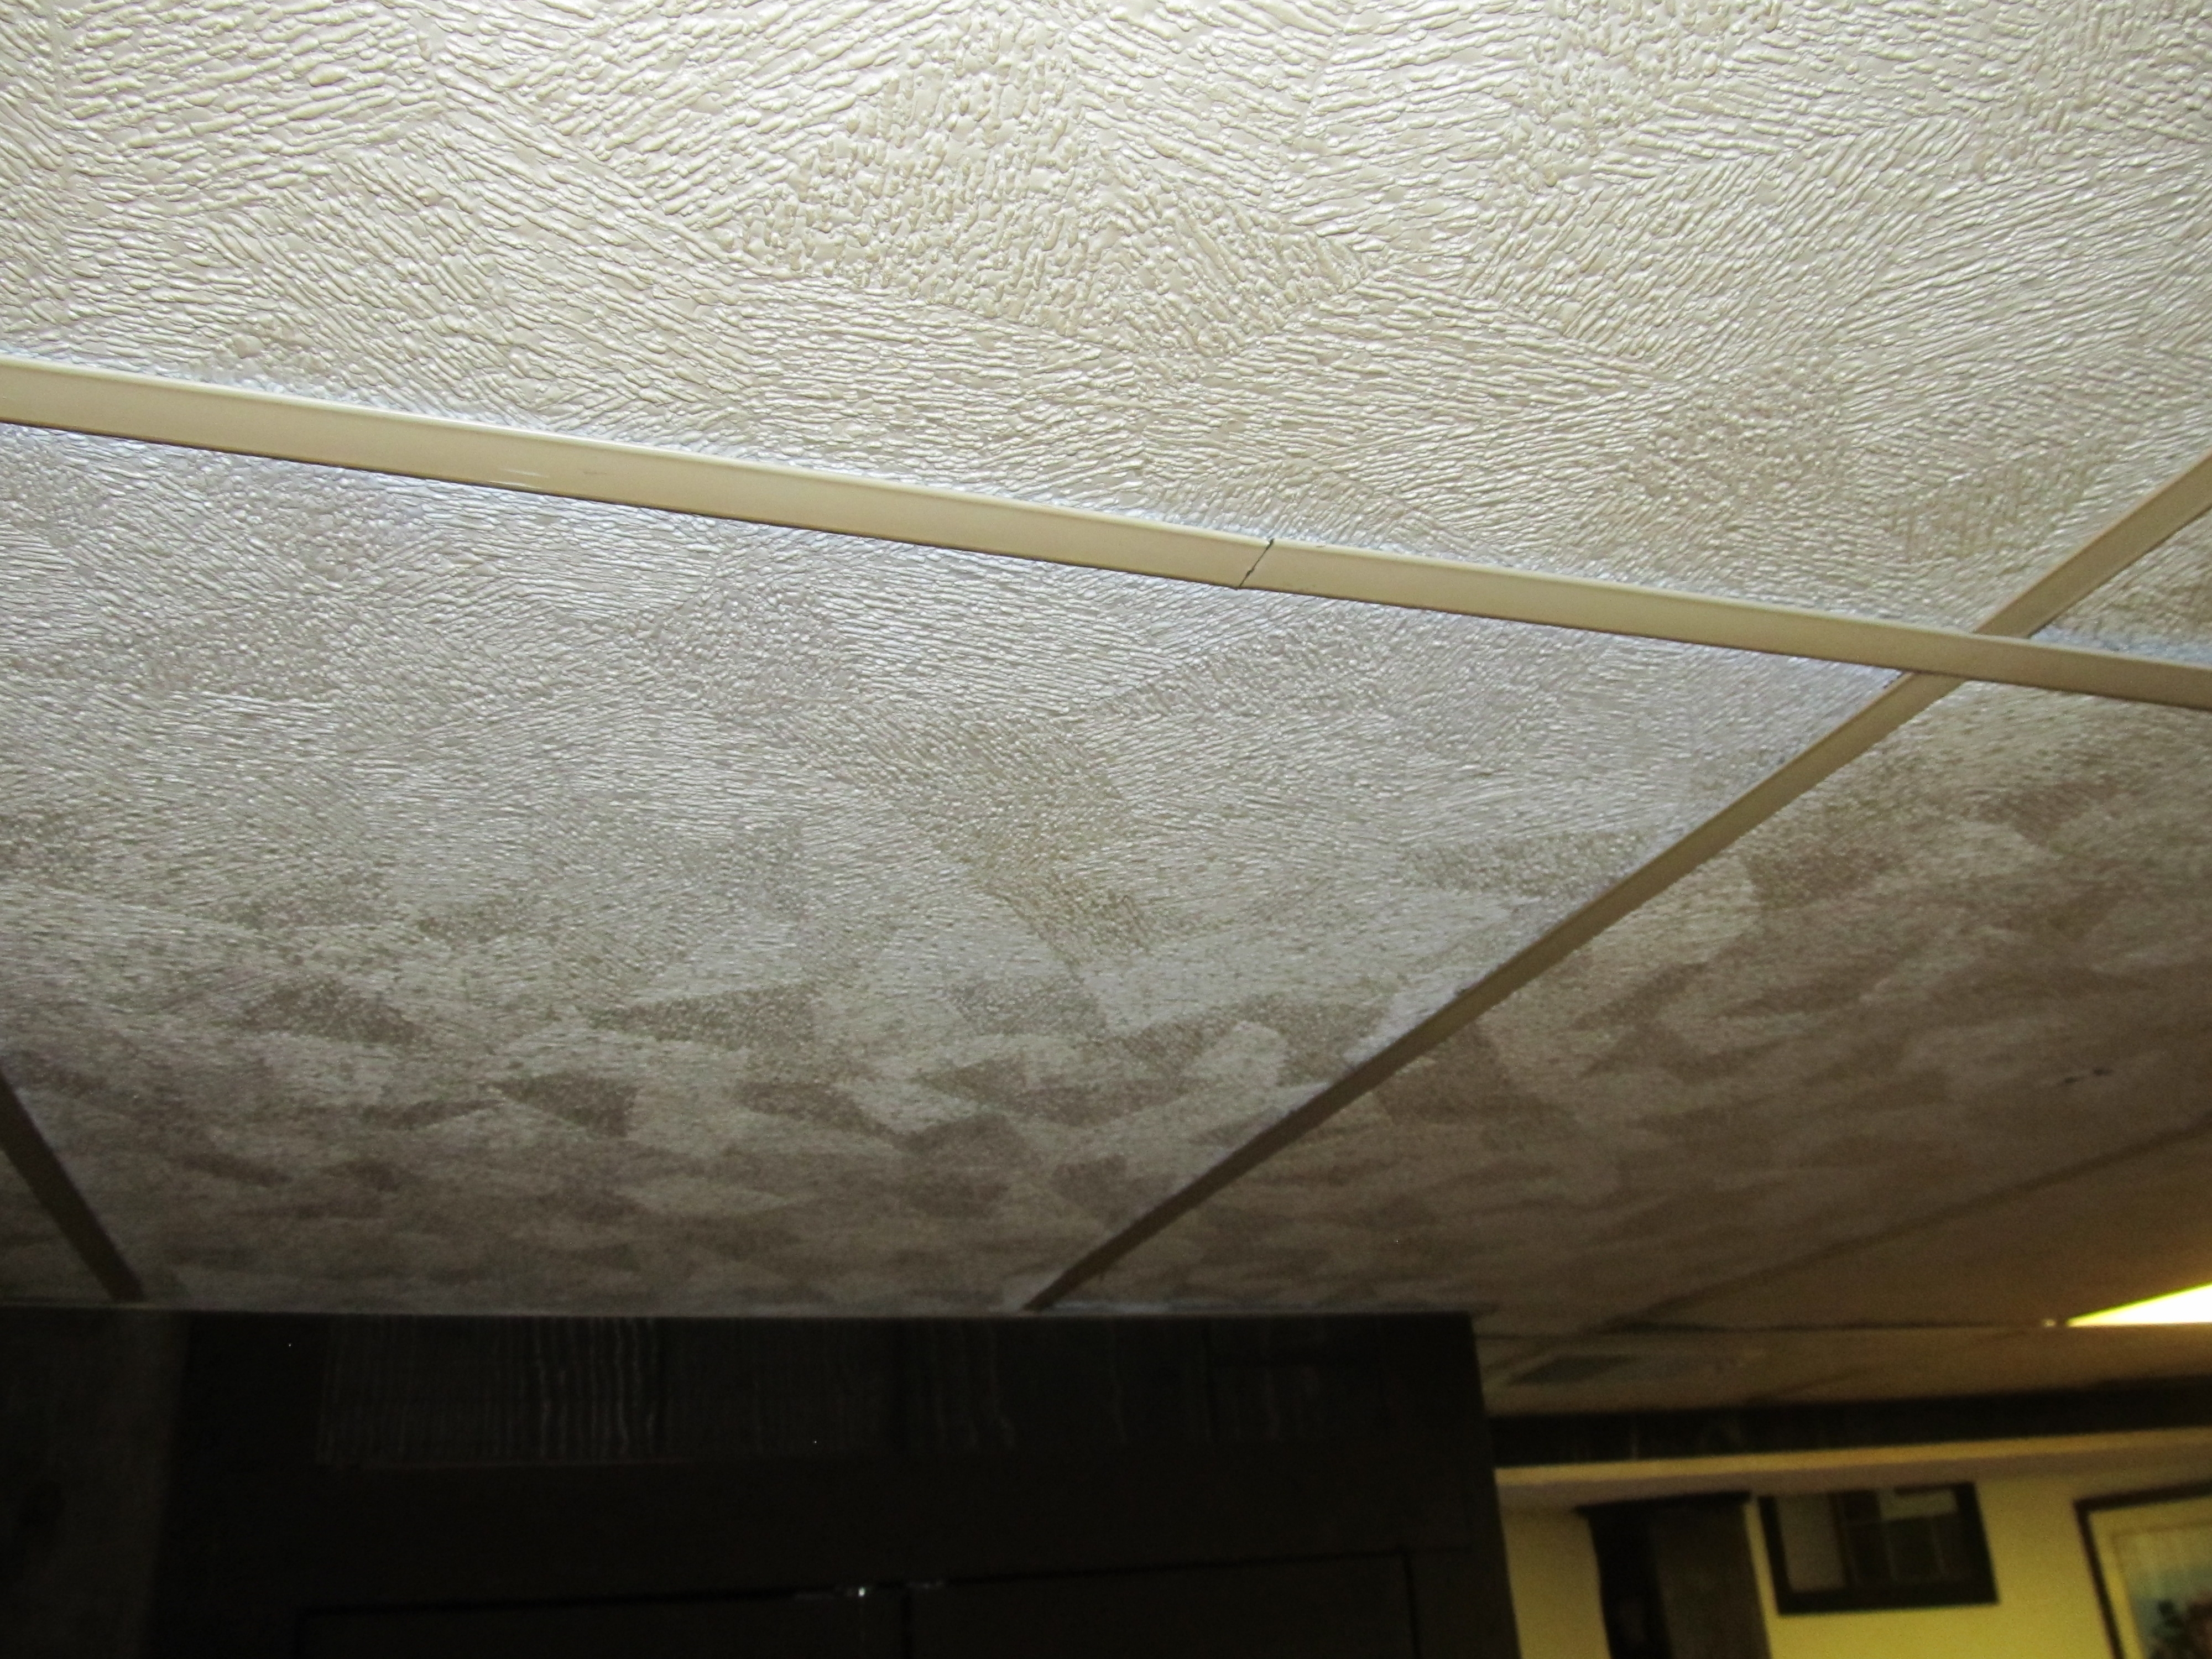 Covering Drop Ceiling Tiles